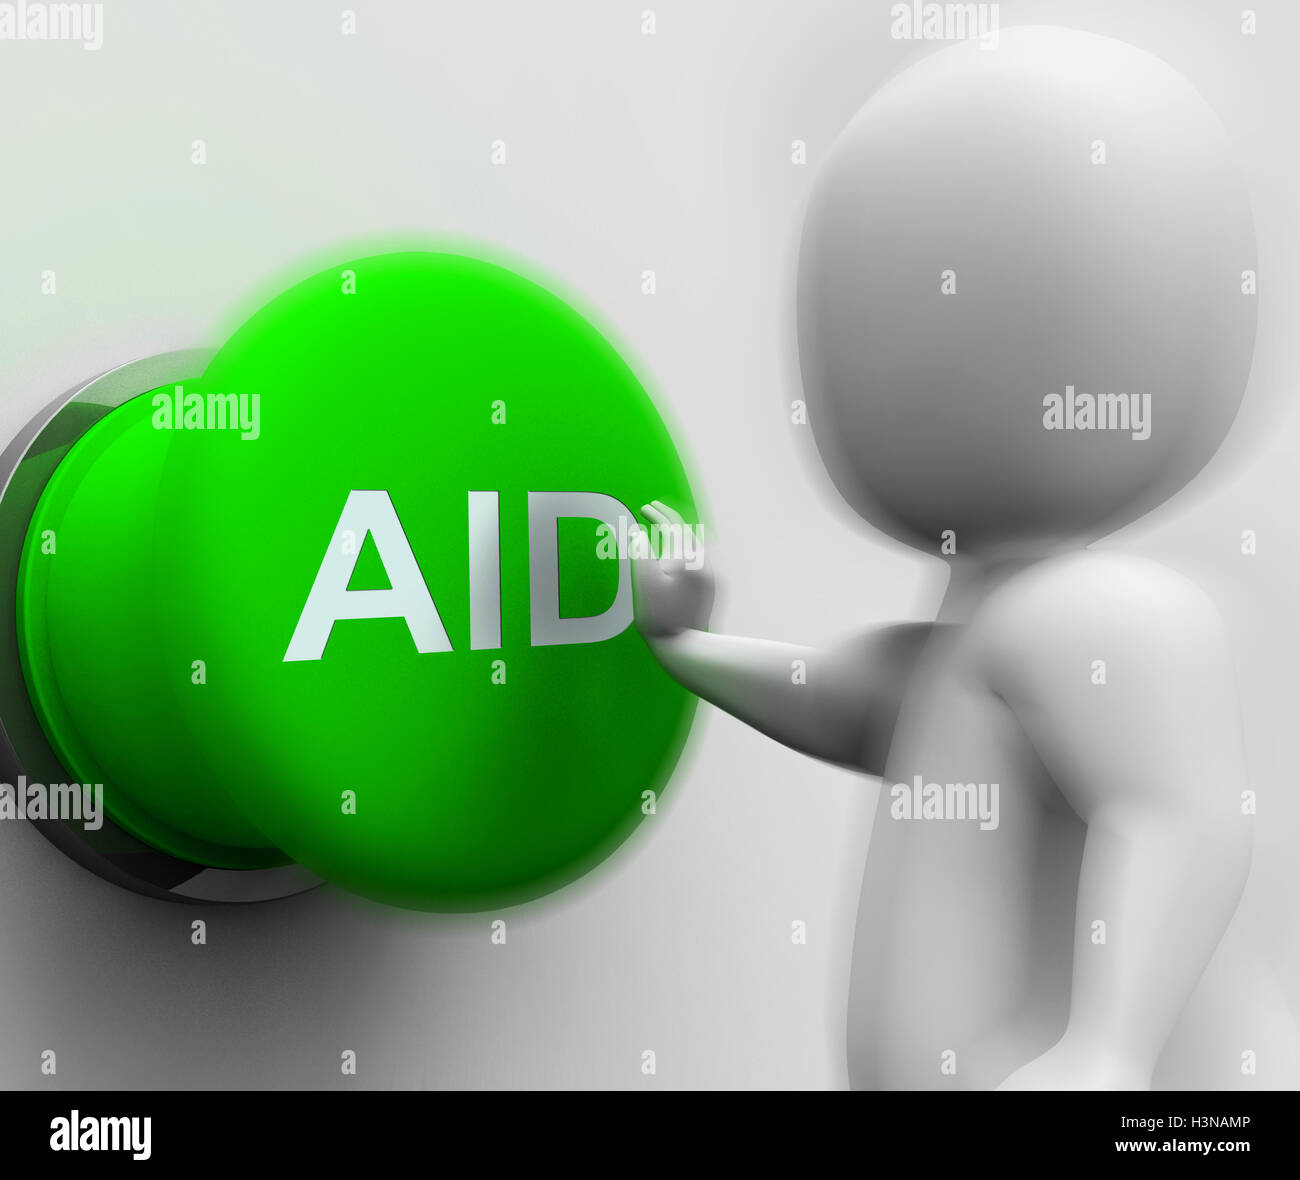 Aid Pressed Shows Rescue Assistance Or Relief Stock Photo